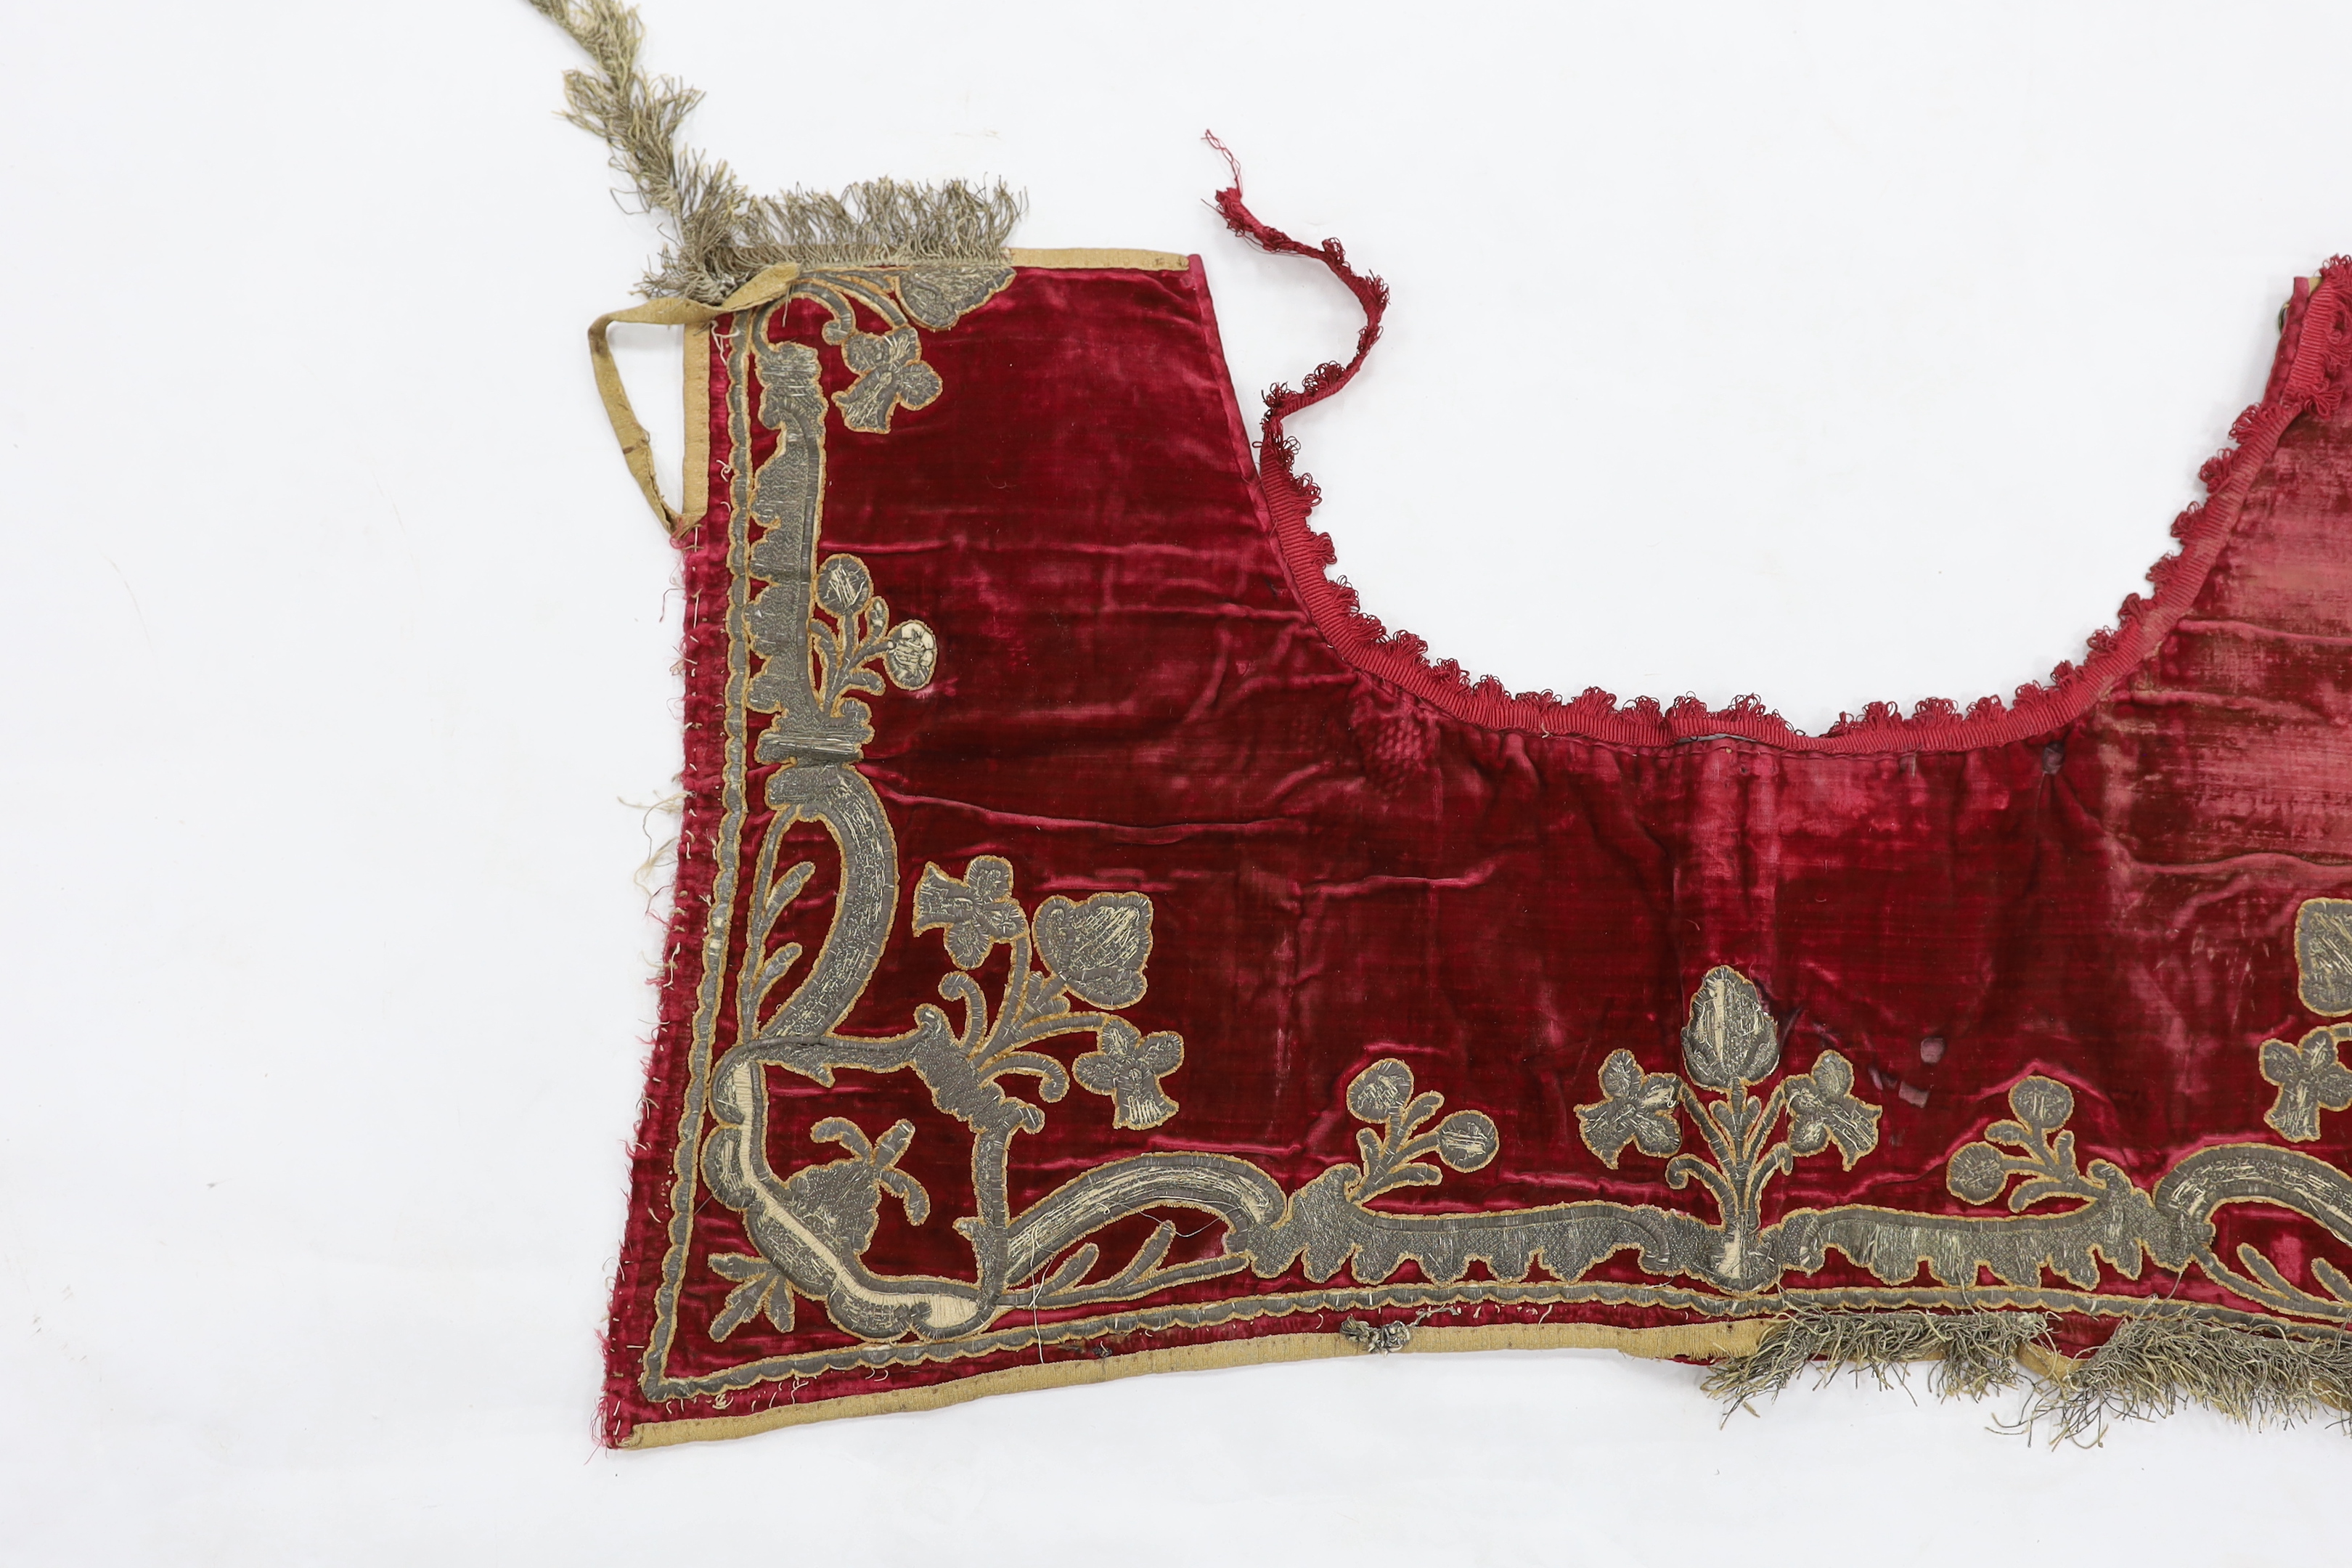 A burgundy velvet and silver thread embroidered and fringed saddle blanket, possibly Italian or Spanish, circa late 18th century, 94cm long x 50cm deep